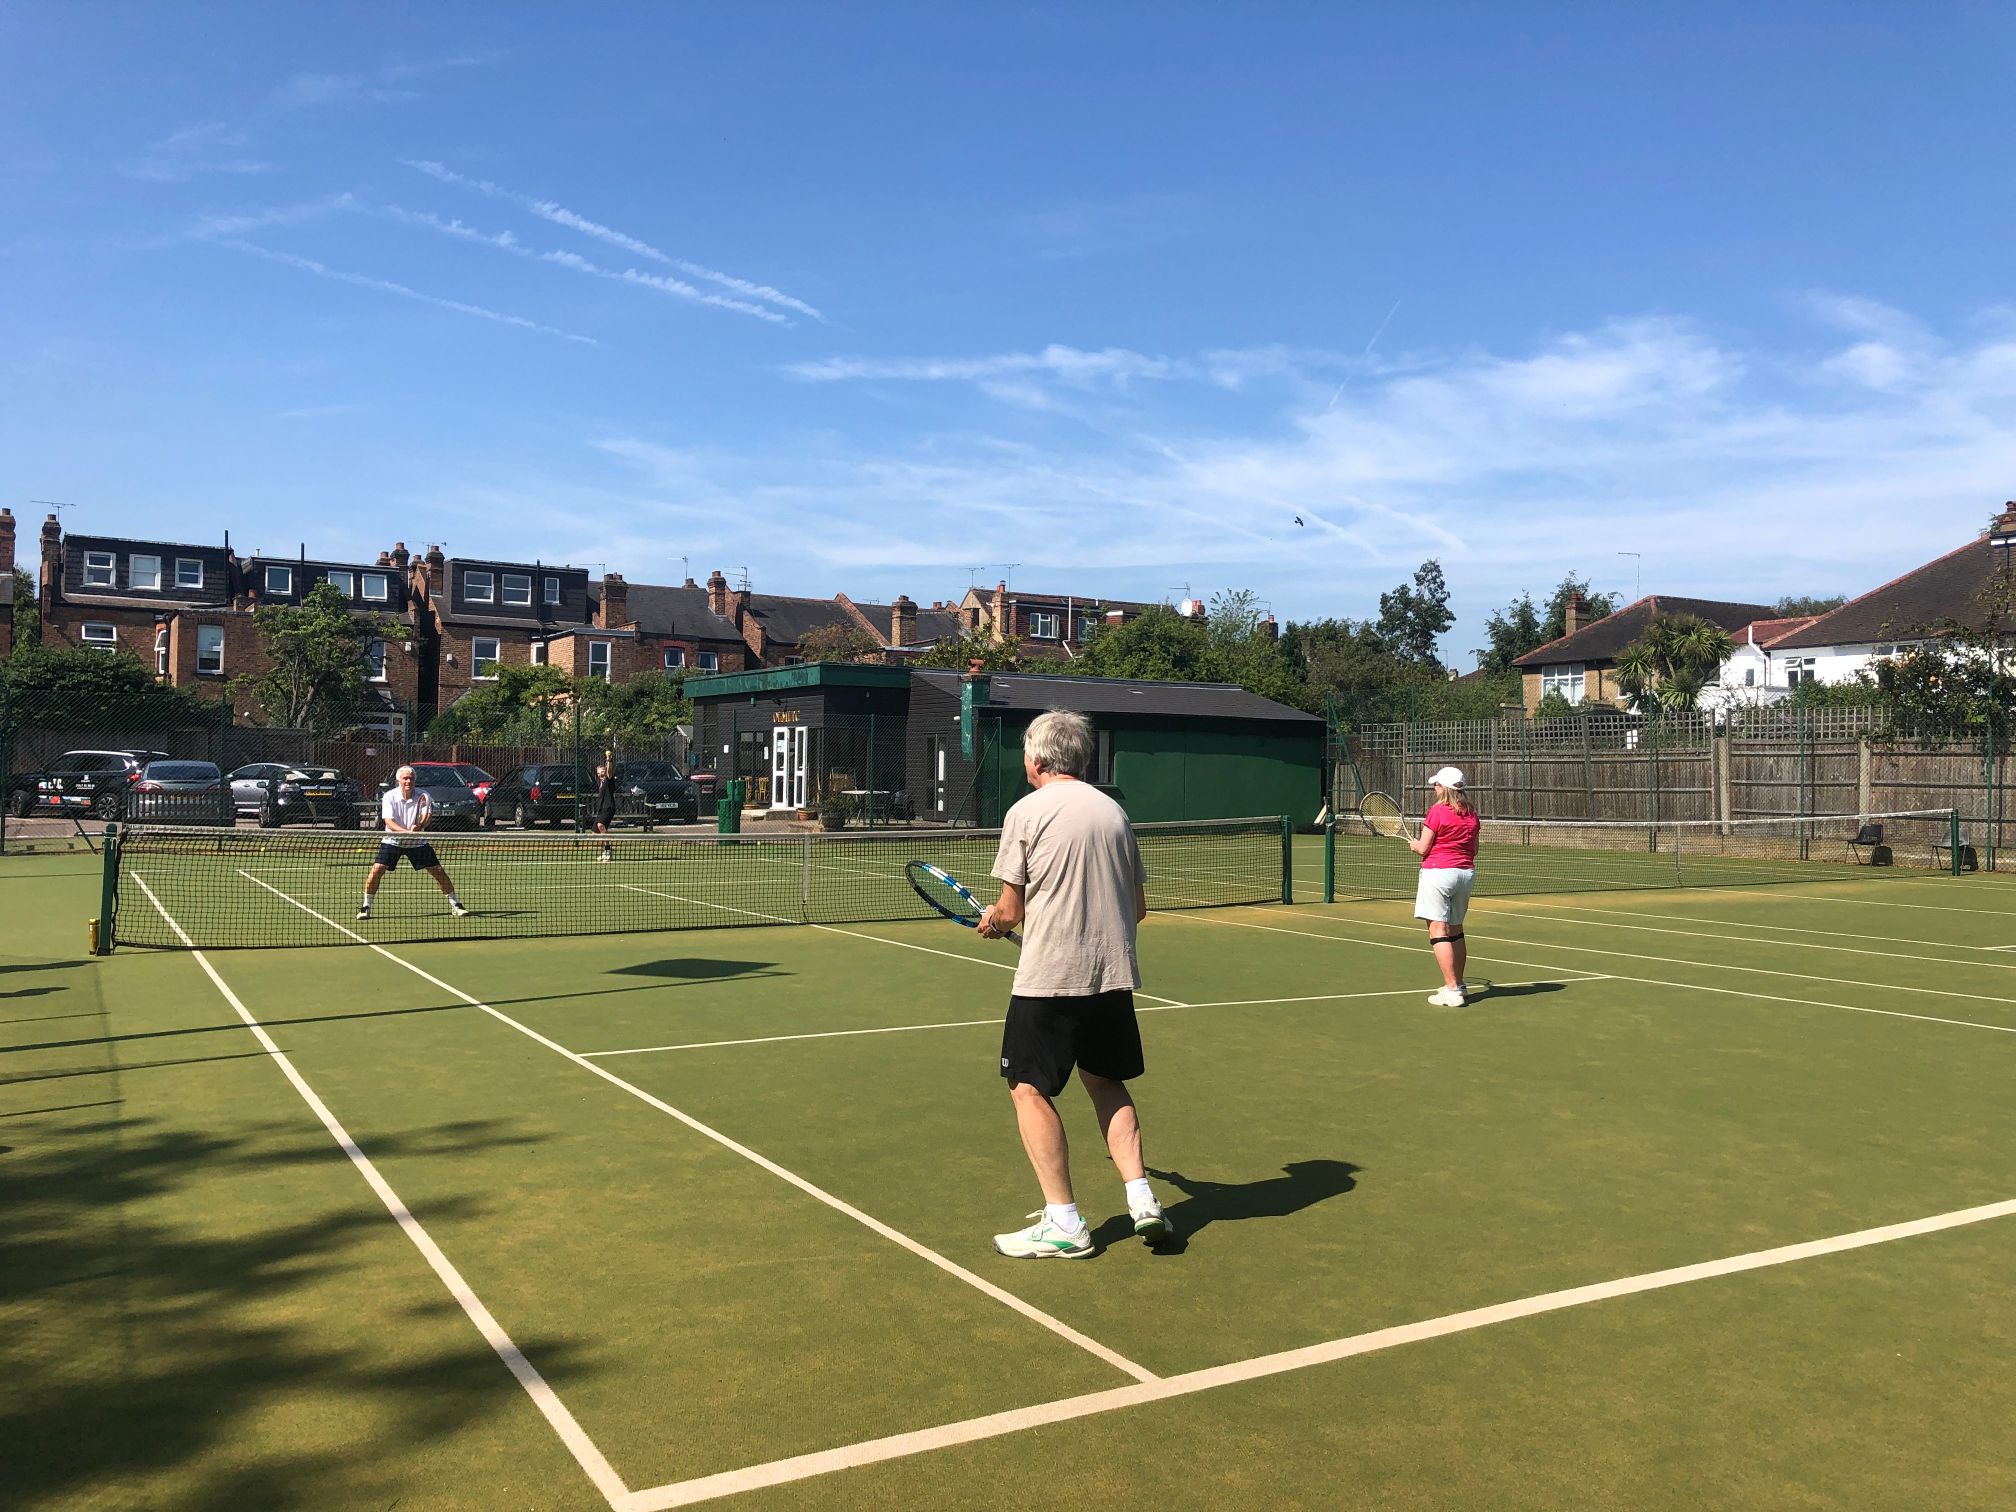 Matchplay 2 surfaces are ideal for court sports such as tennis and badminton, as well as for track, field and full contact sports.